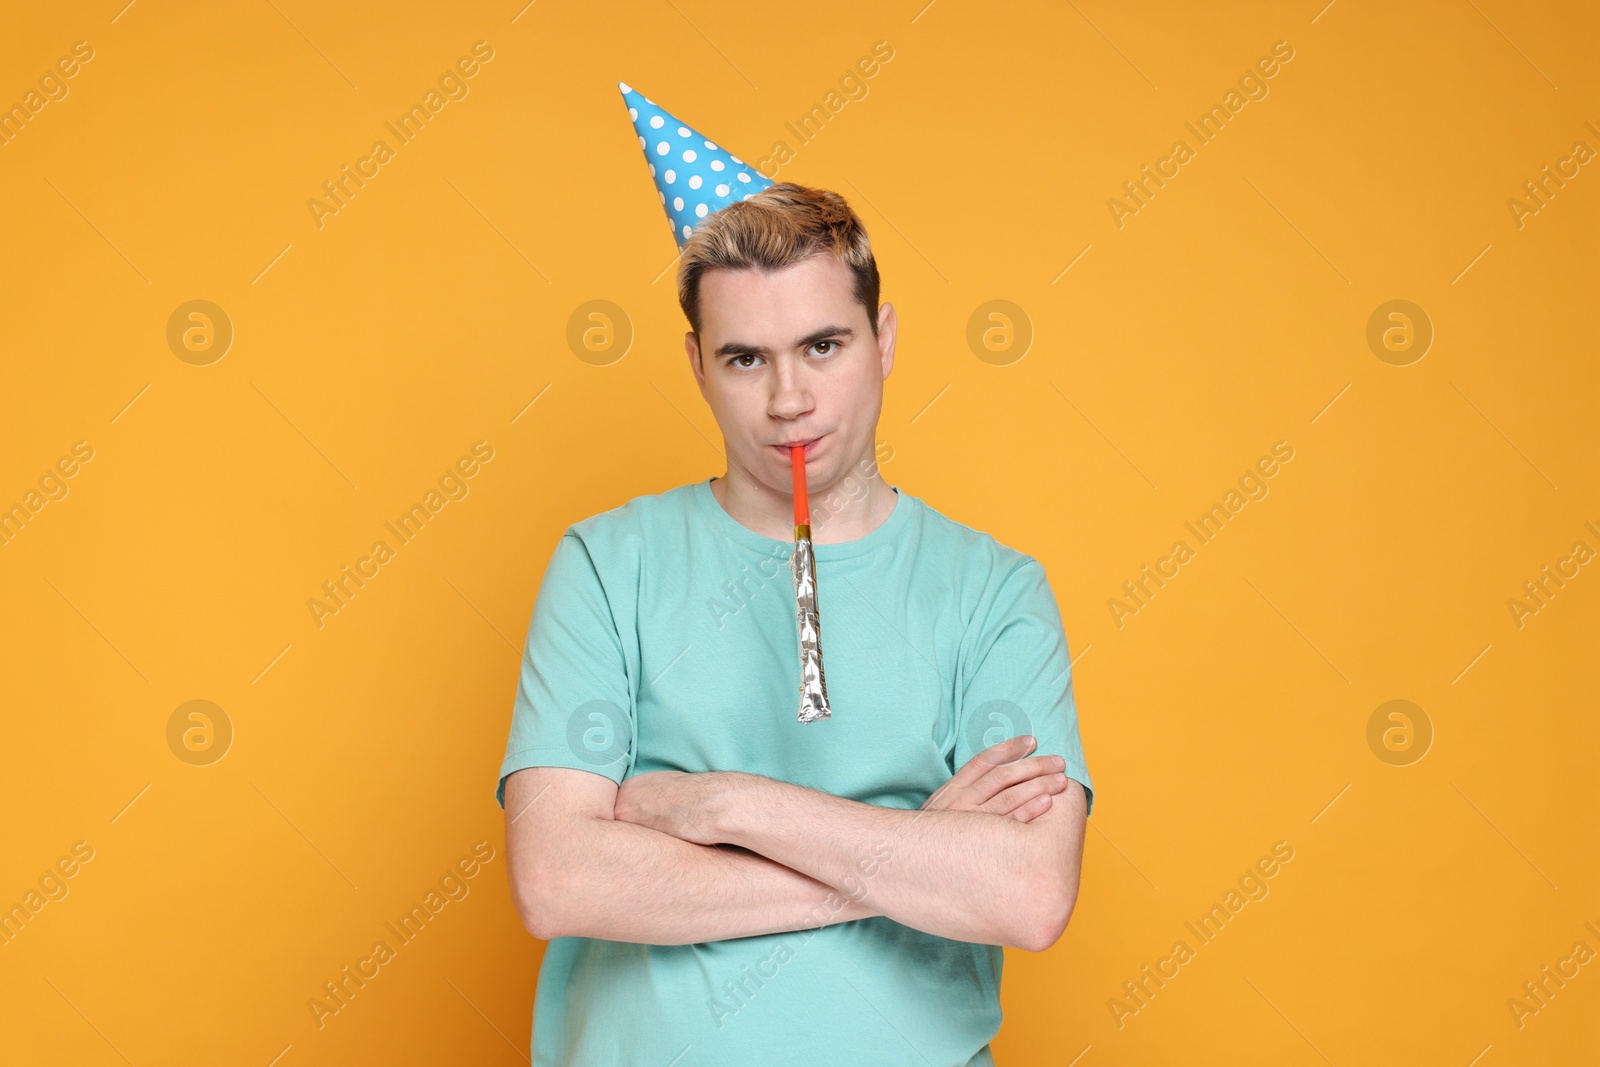 Photo of Sad young man with party hat and blower on orange background